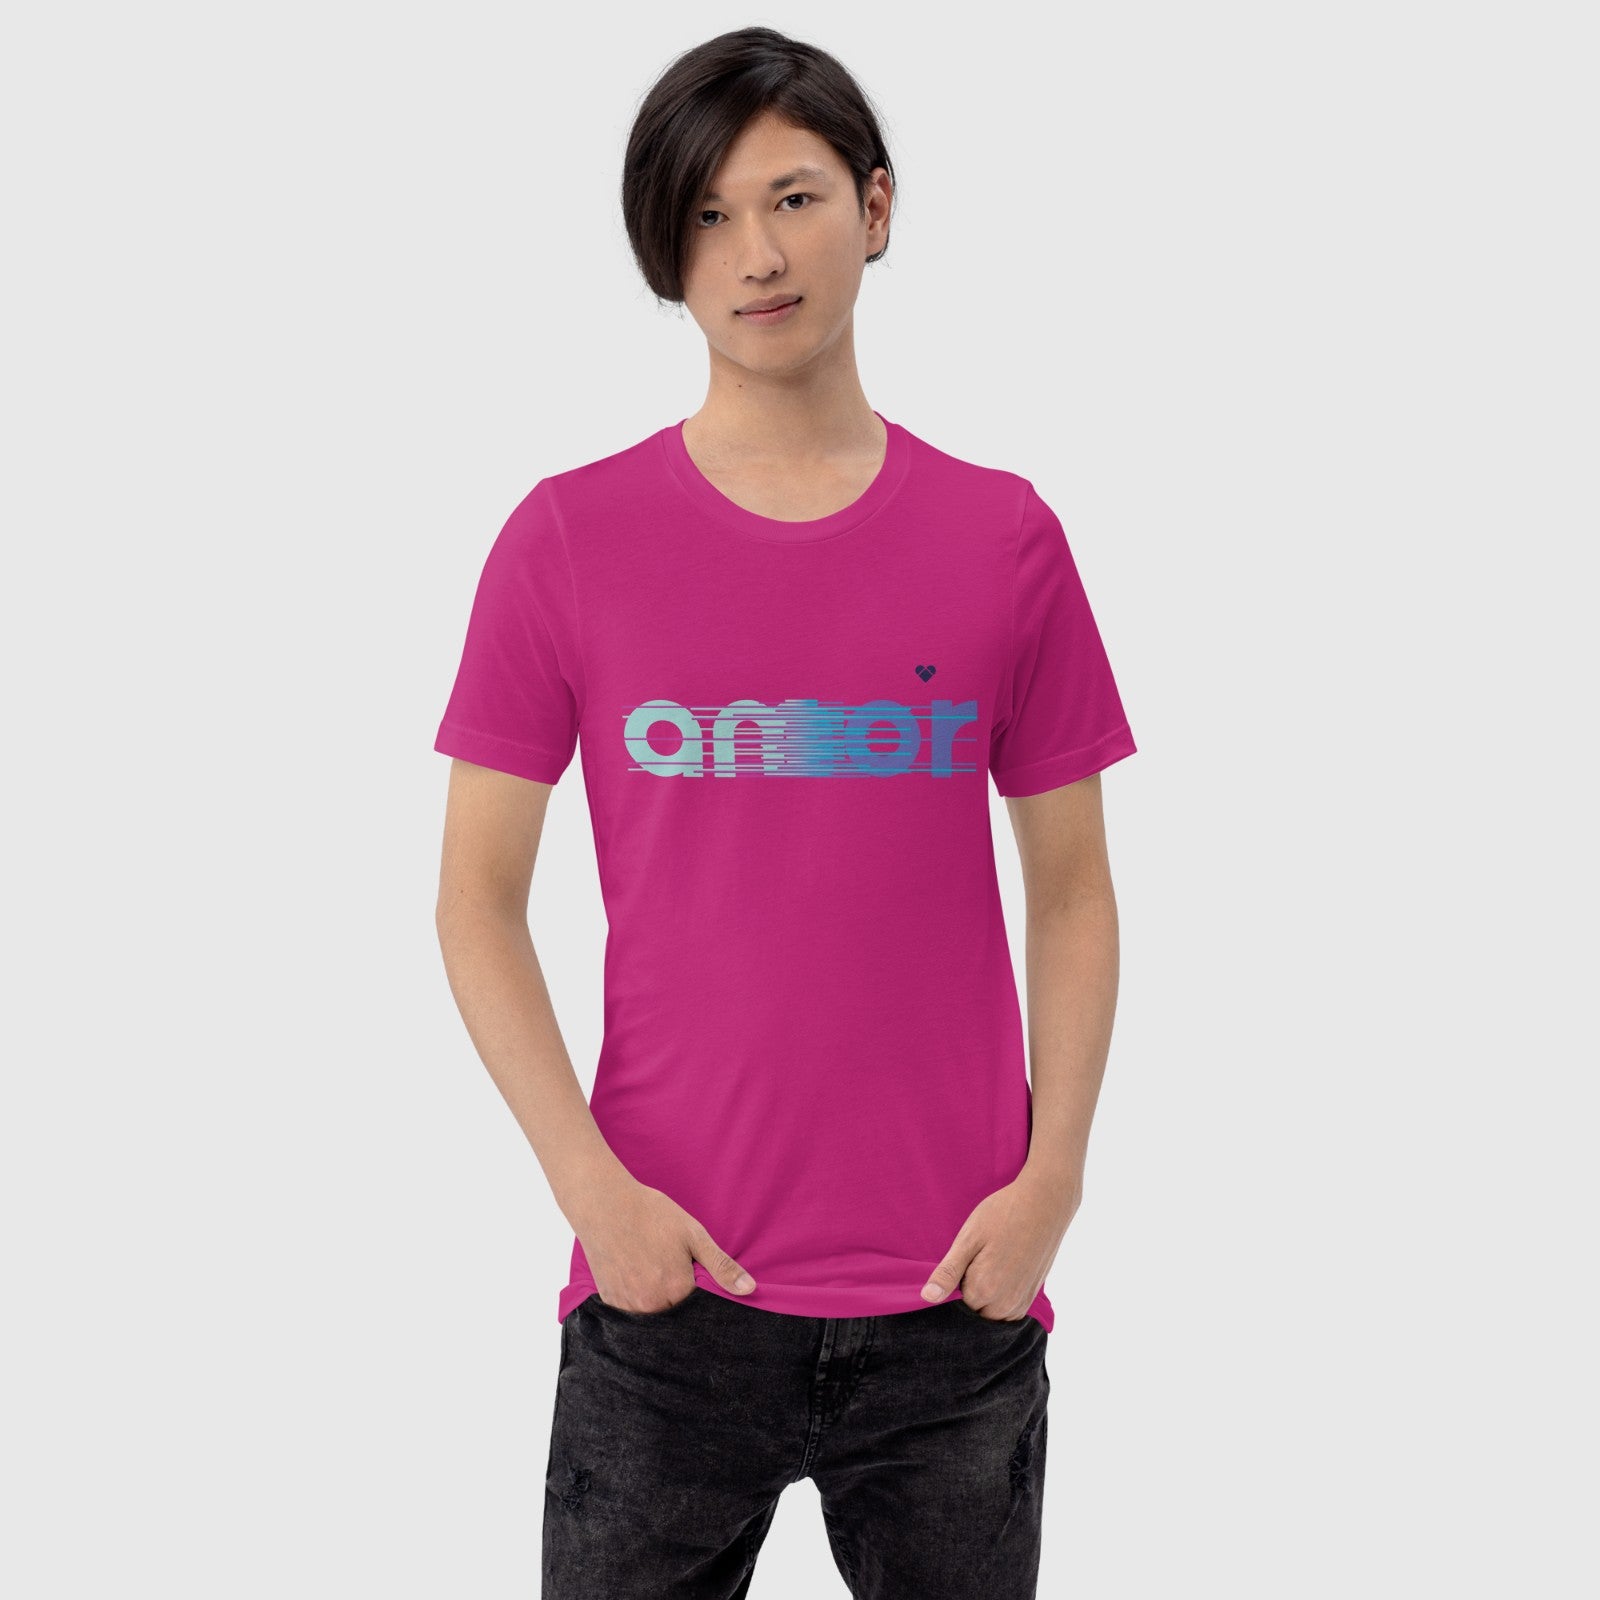 Funky Pink T-Shirt - Part of Amor Dual Collection